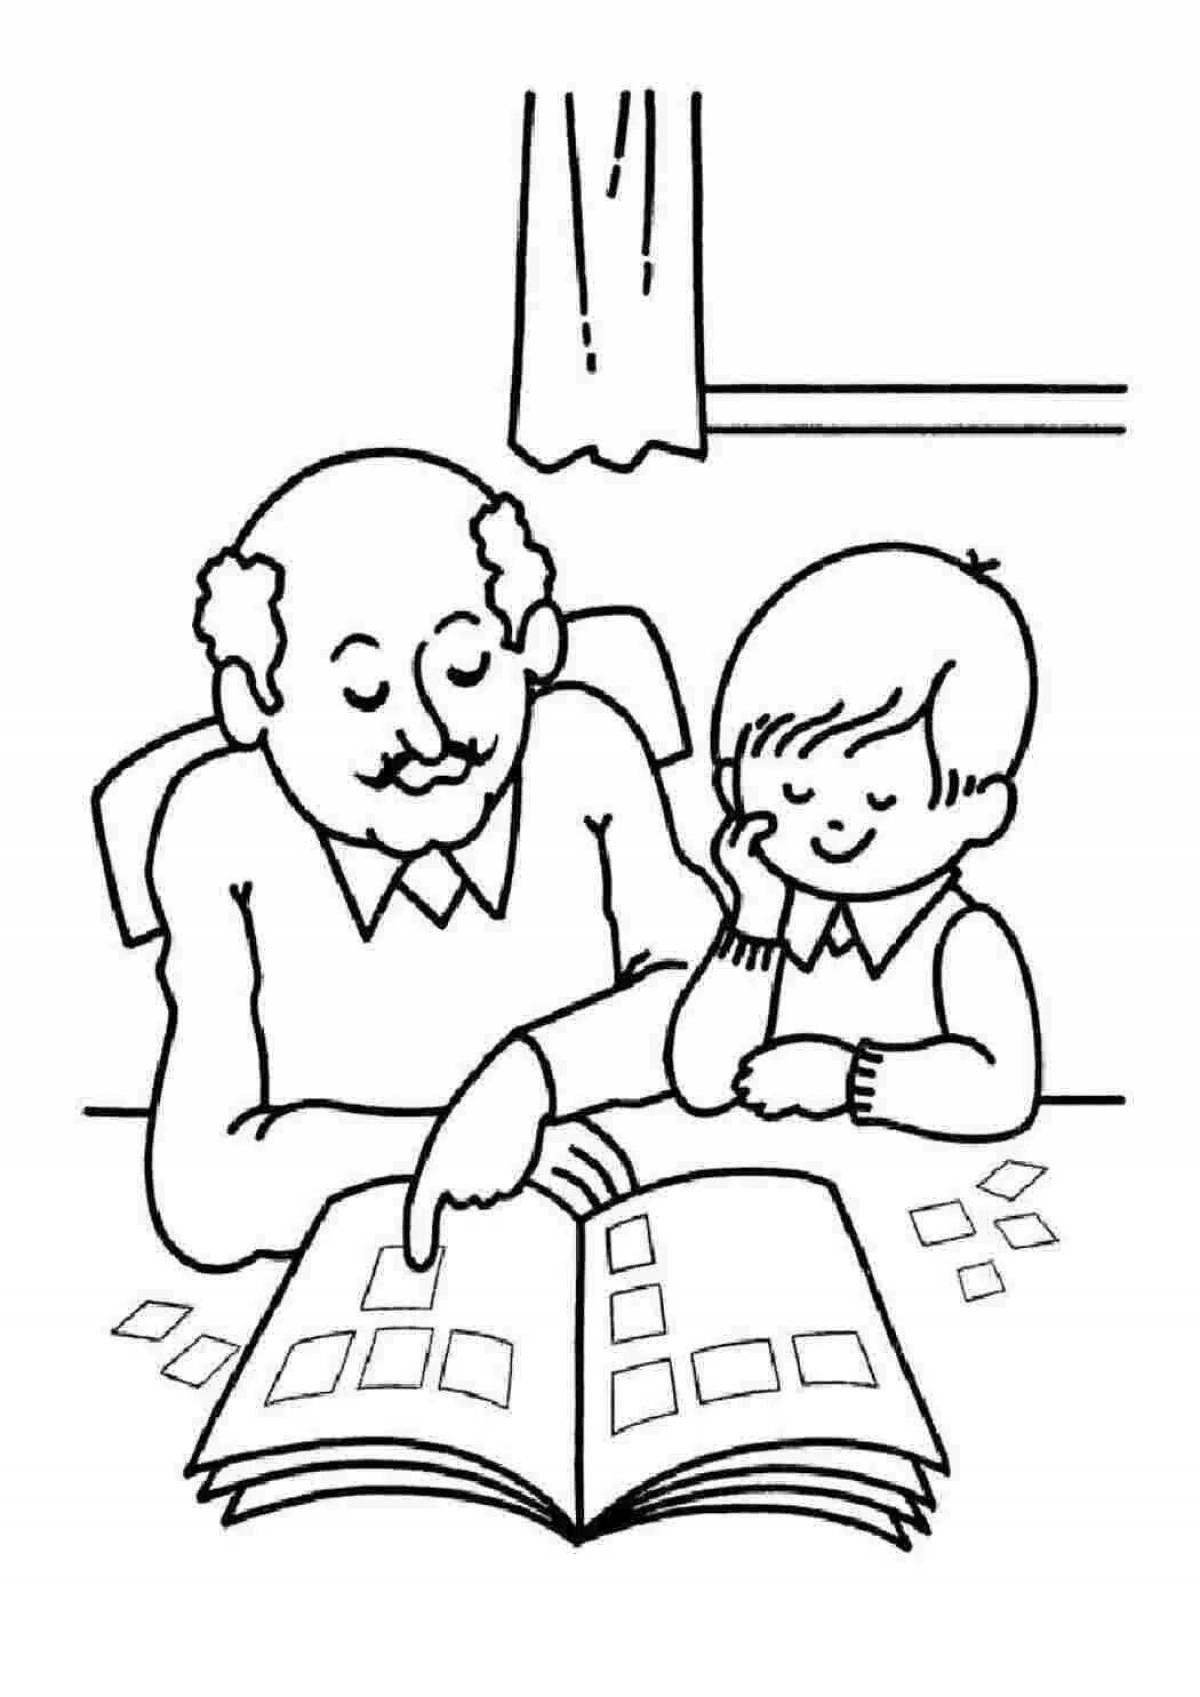 Coloring page affectionate grandfather and granddaughter